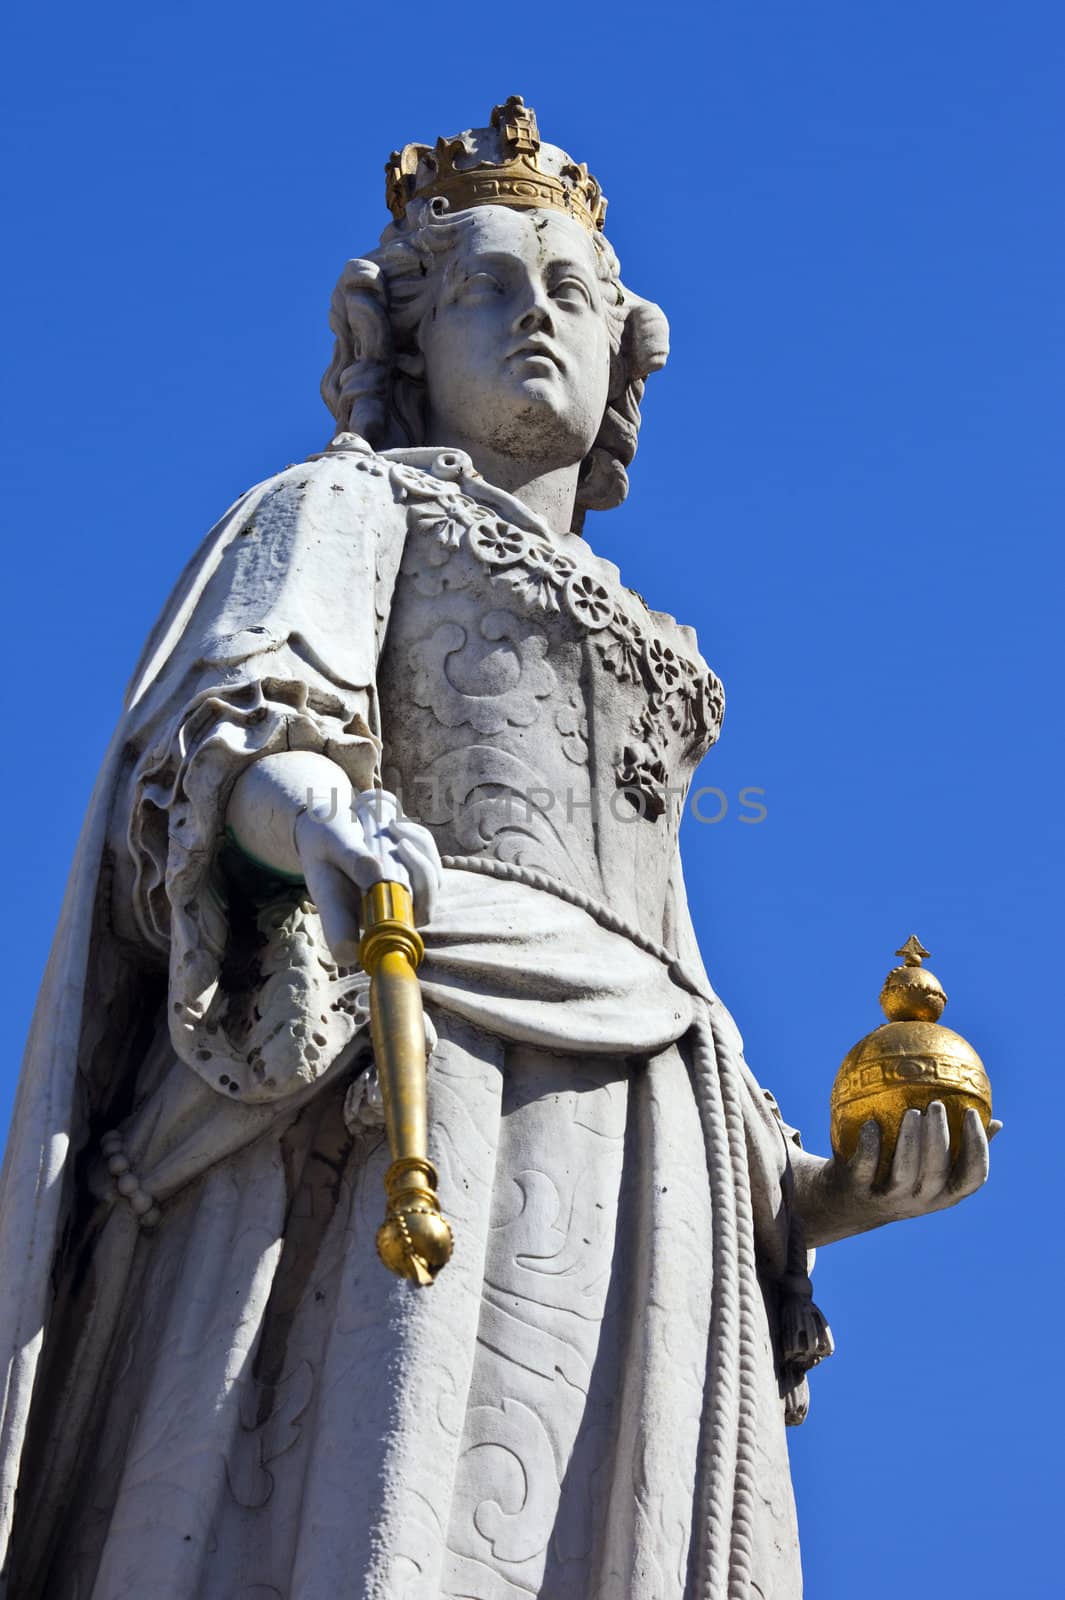 The statue of Queen Anne, situated outside St. Paul's Cathedral in London.